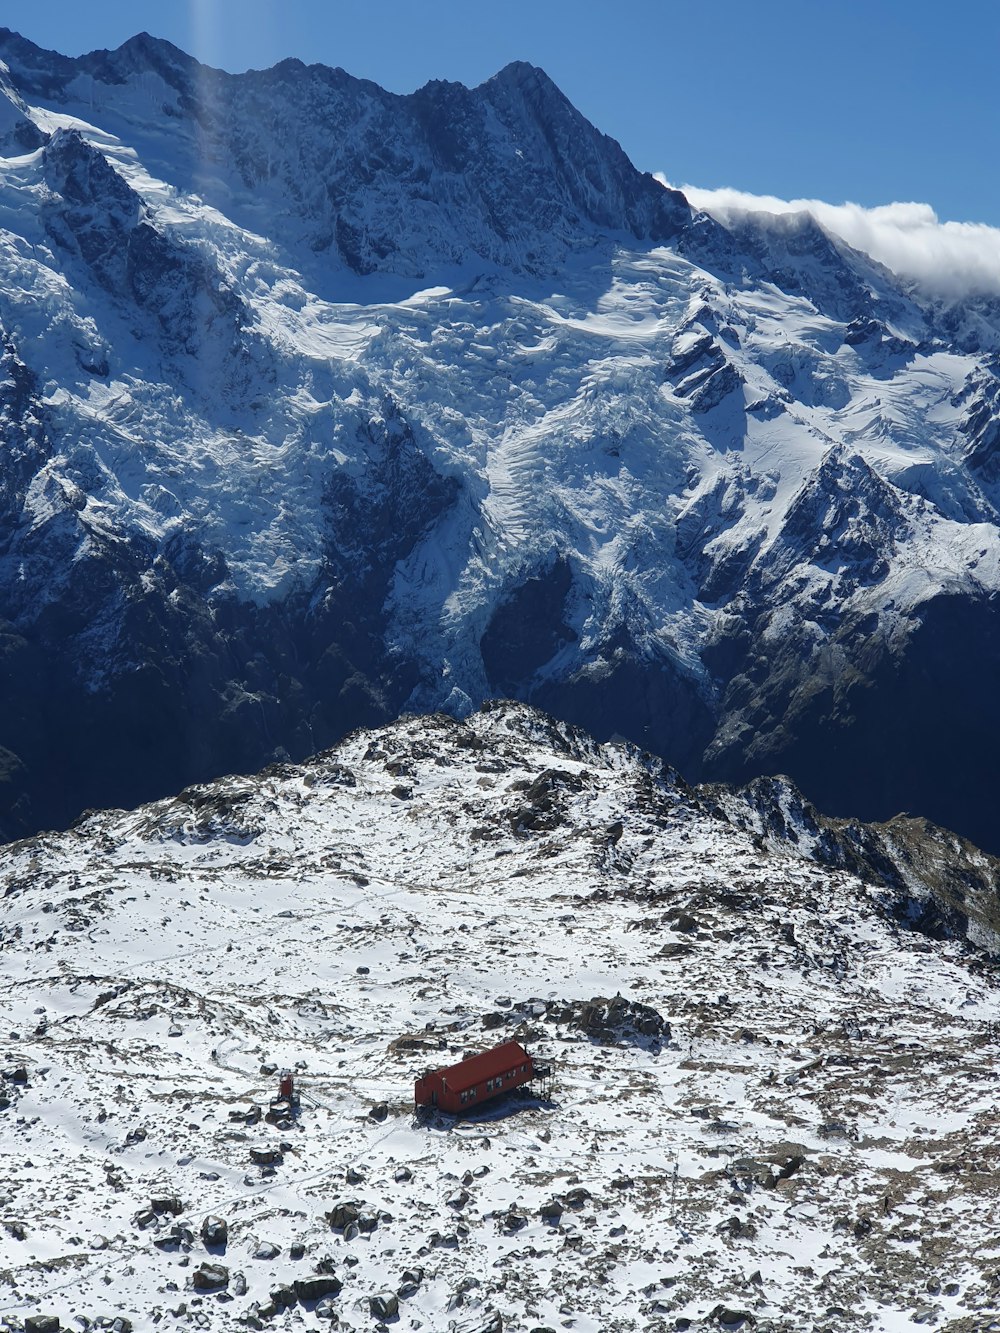 a snow covered mountain with a red car in the foreground